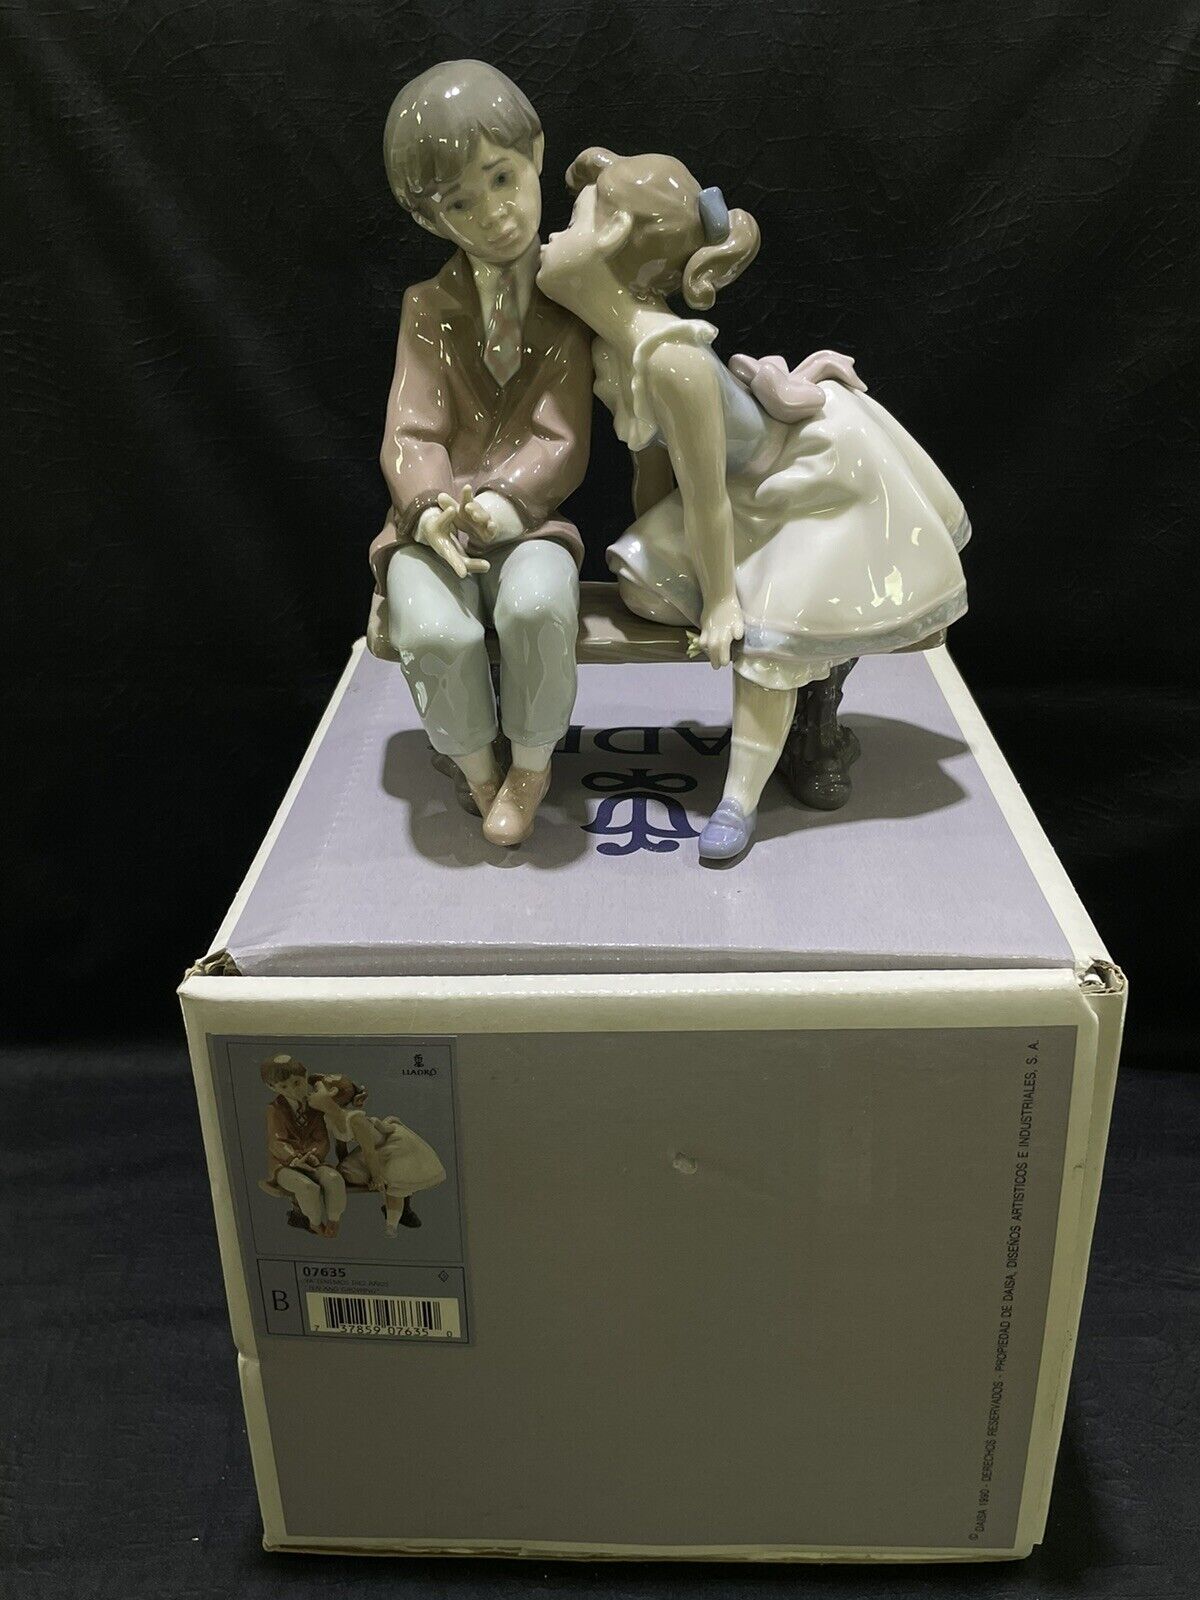 NEW BOX Lladro 7635 Ten and Growing Girl Kissing Boy on Bench Porcelain Figurine